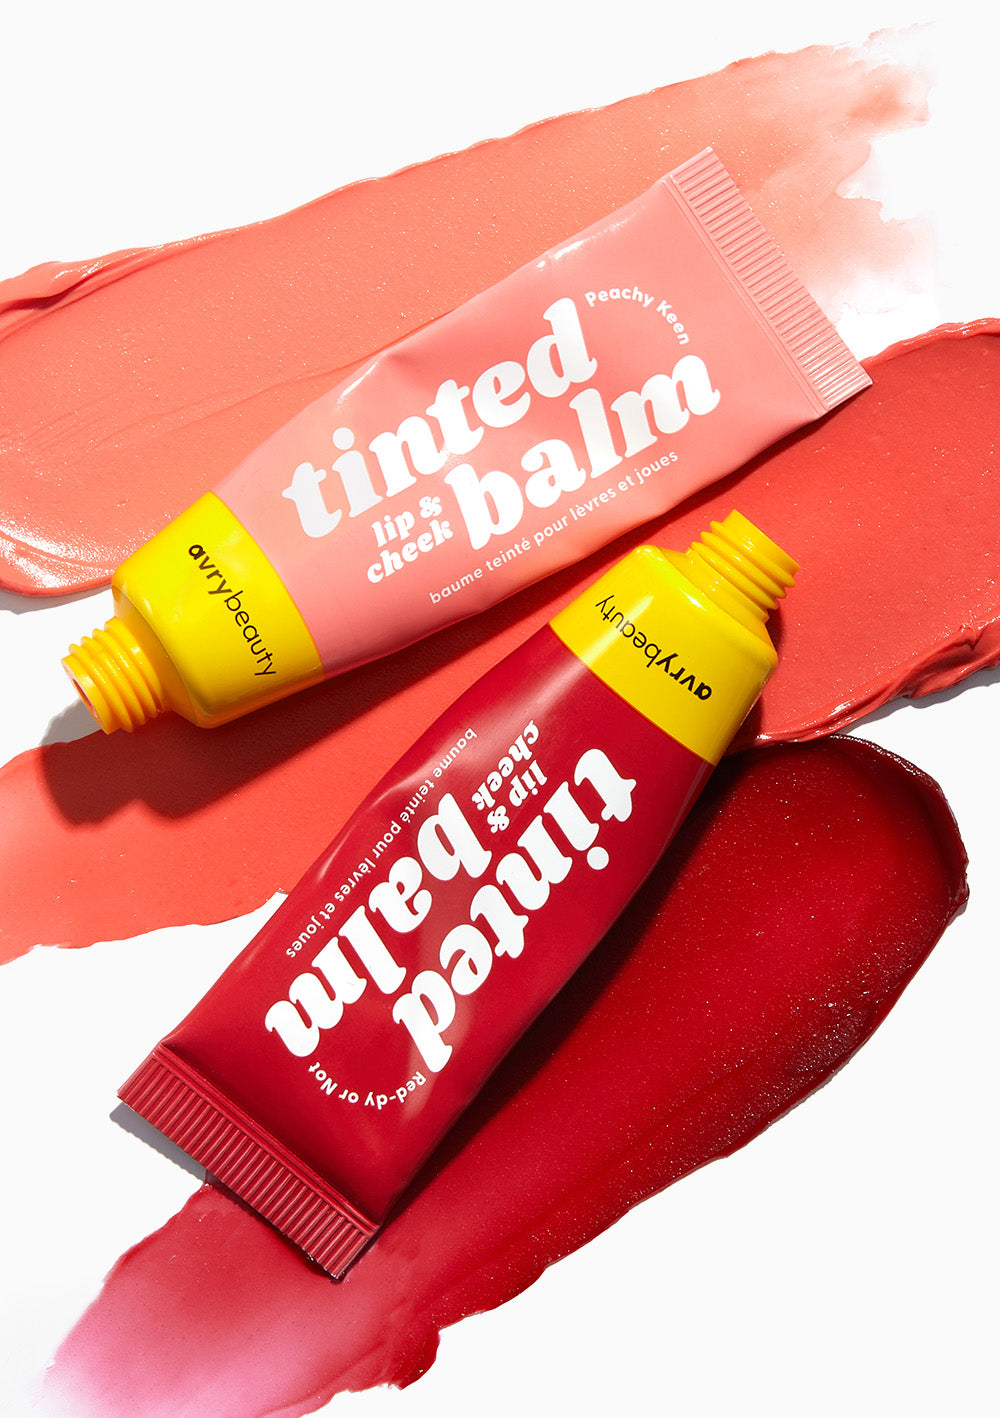 AvryBeauty Red-dy or Not and Peachy Keen Lip & Cheek Tinted Balms displayed on textured swipes, on top of a white background.